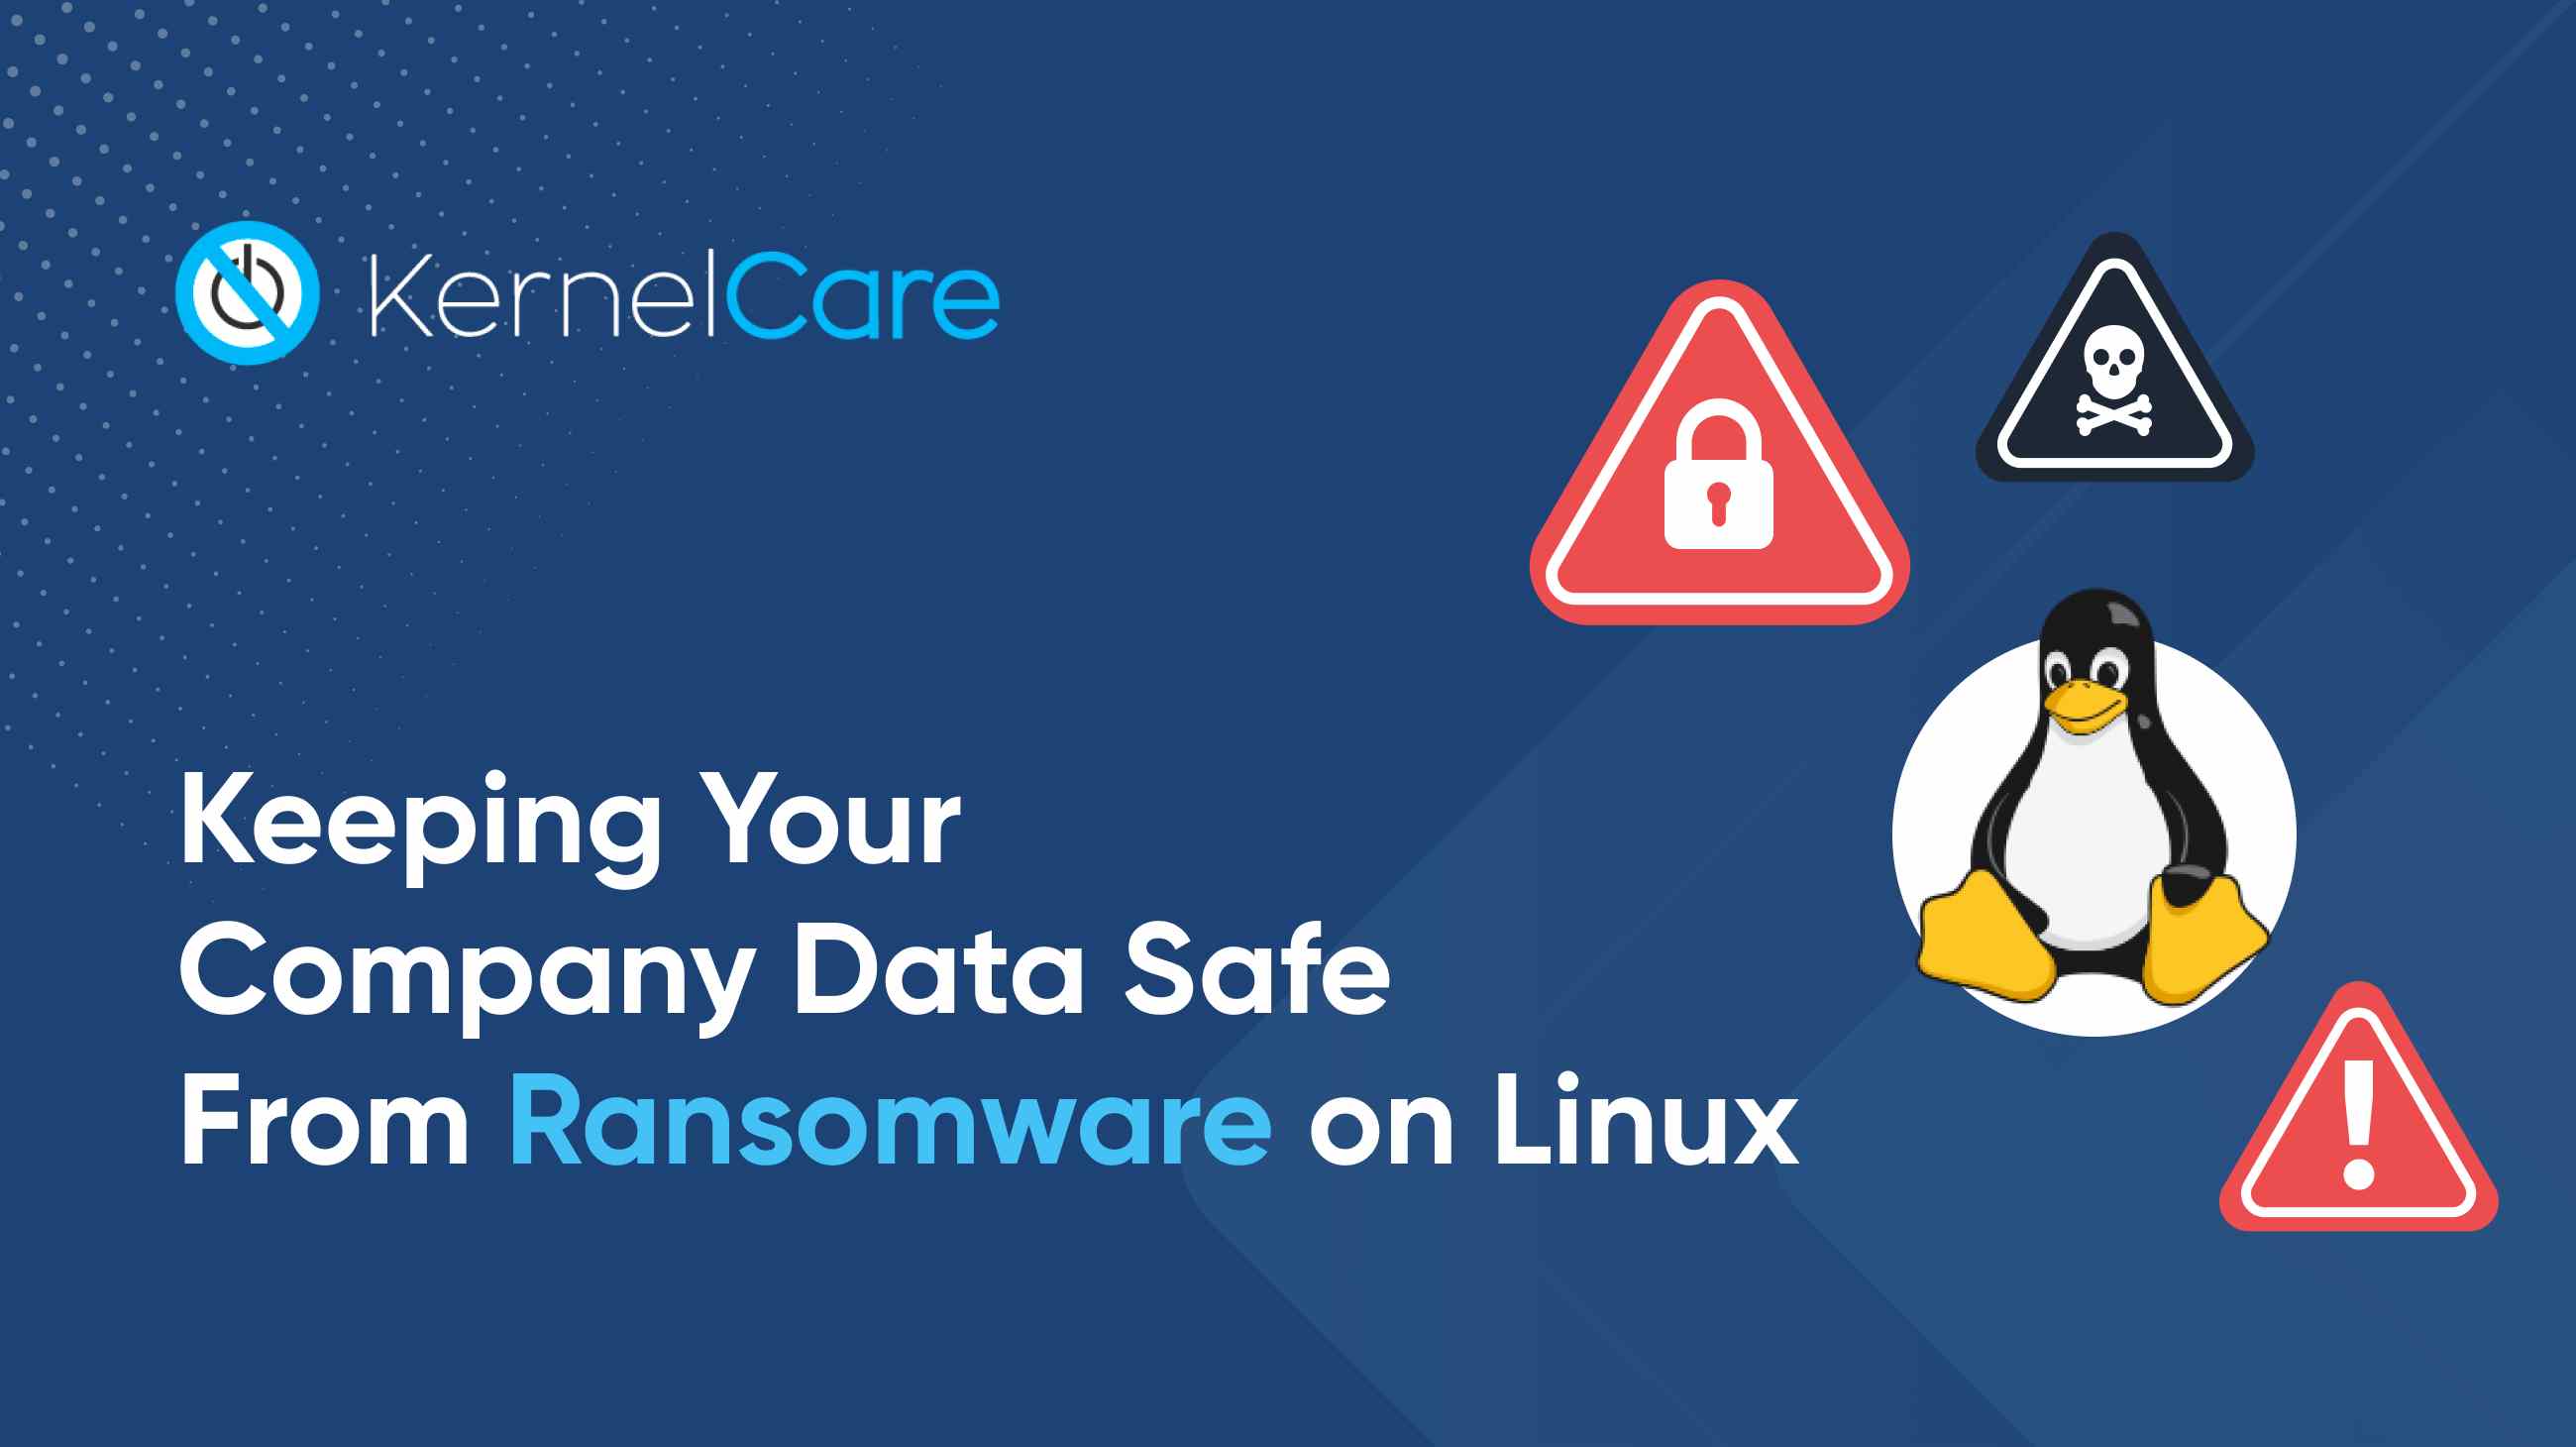 Keeping Your Company Data Safe From Ransomware on Linux